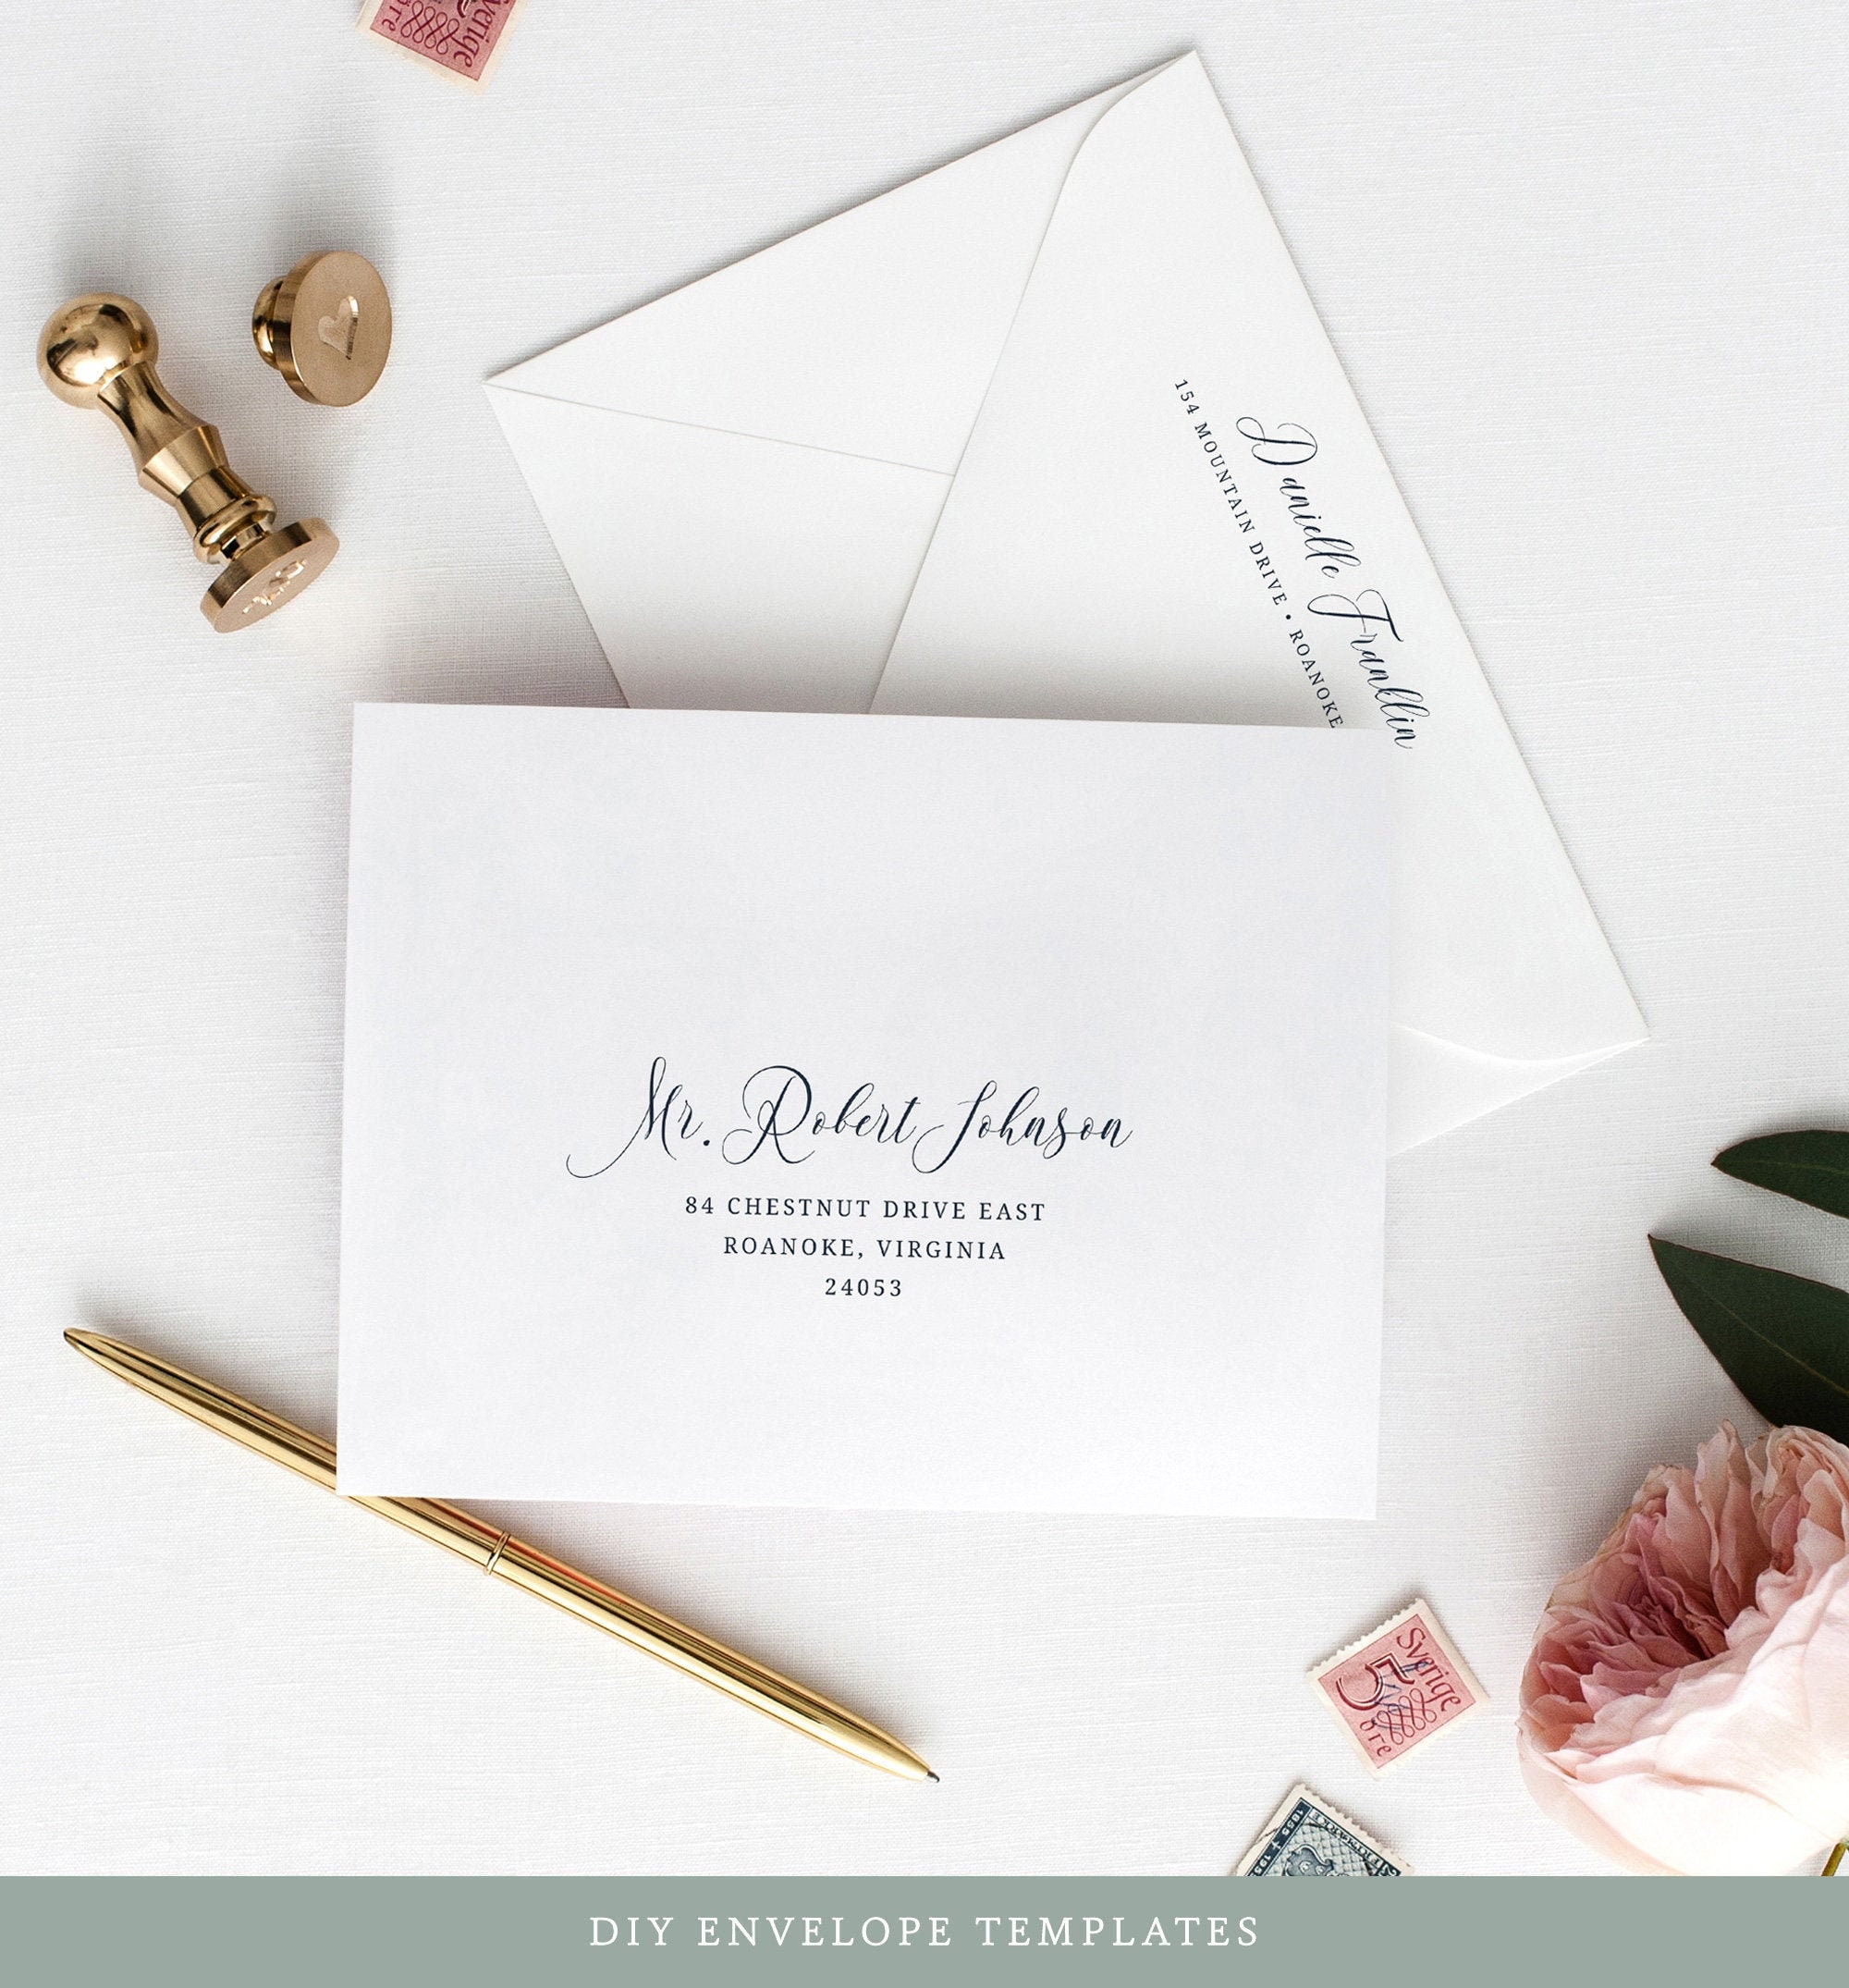 Calligraphy Wedding Envelope Template Envelope Addressing picture